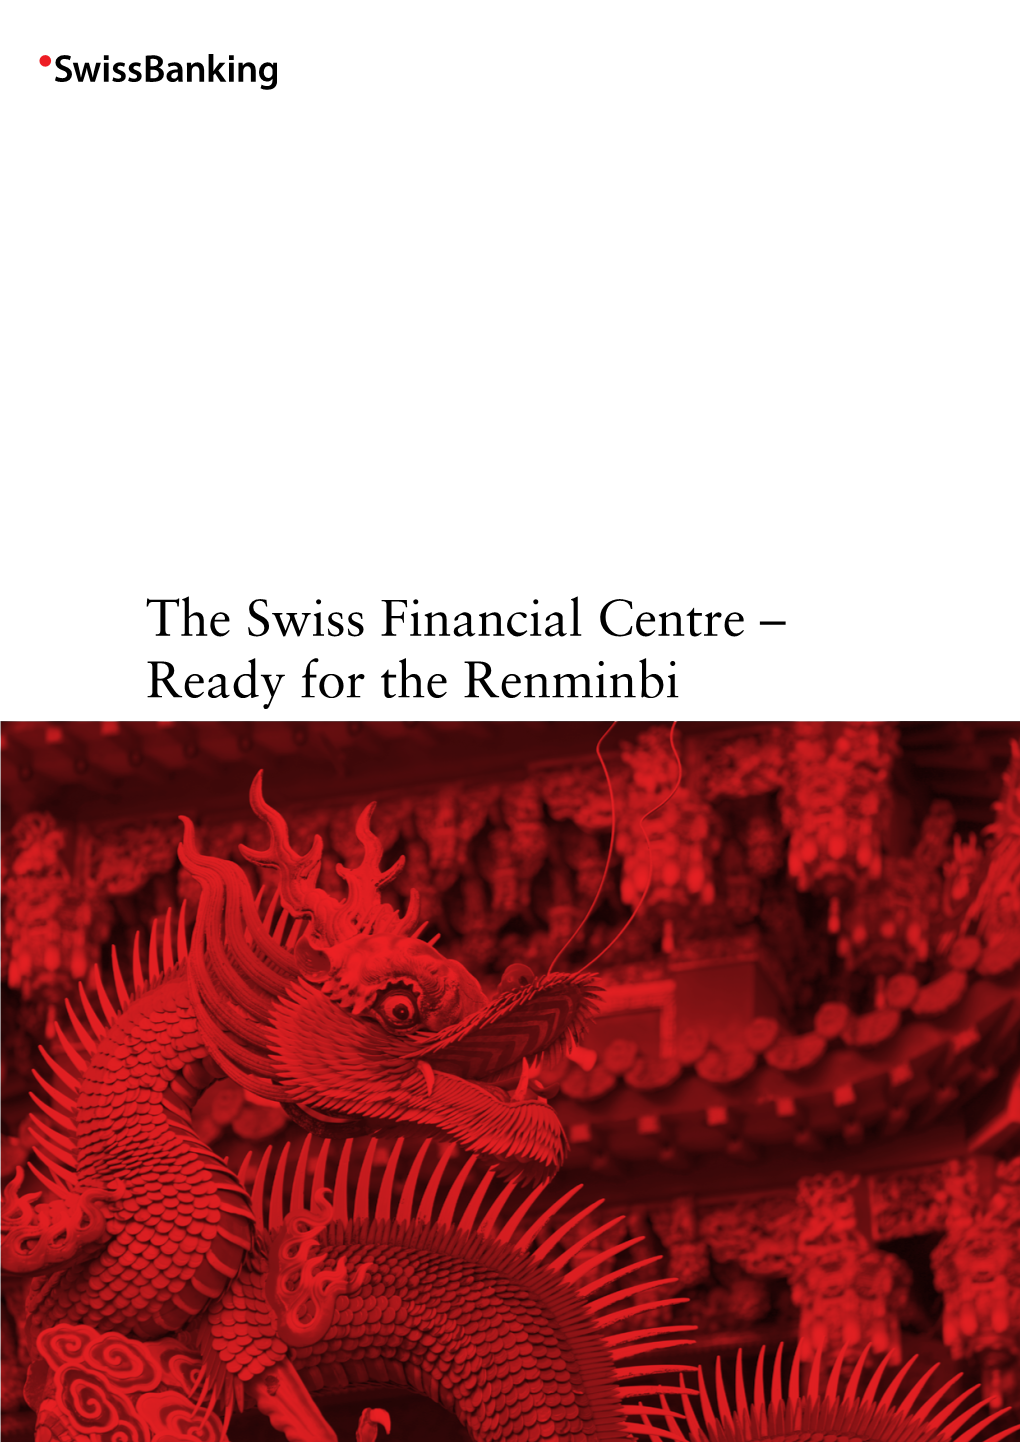 The Swiss Financial Centre – Ready for the Renminbi